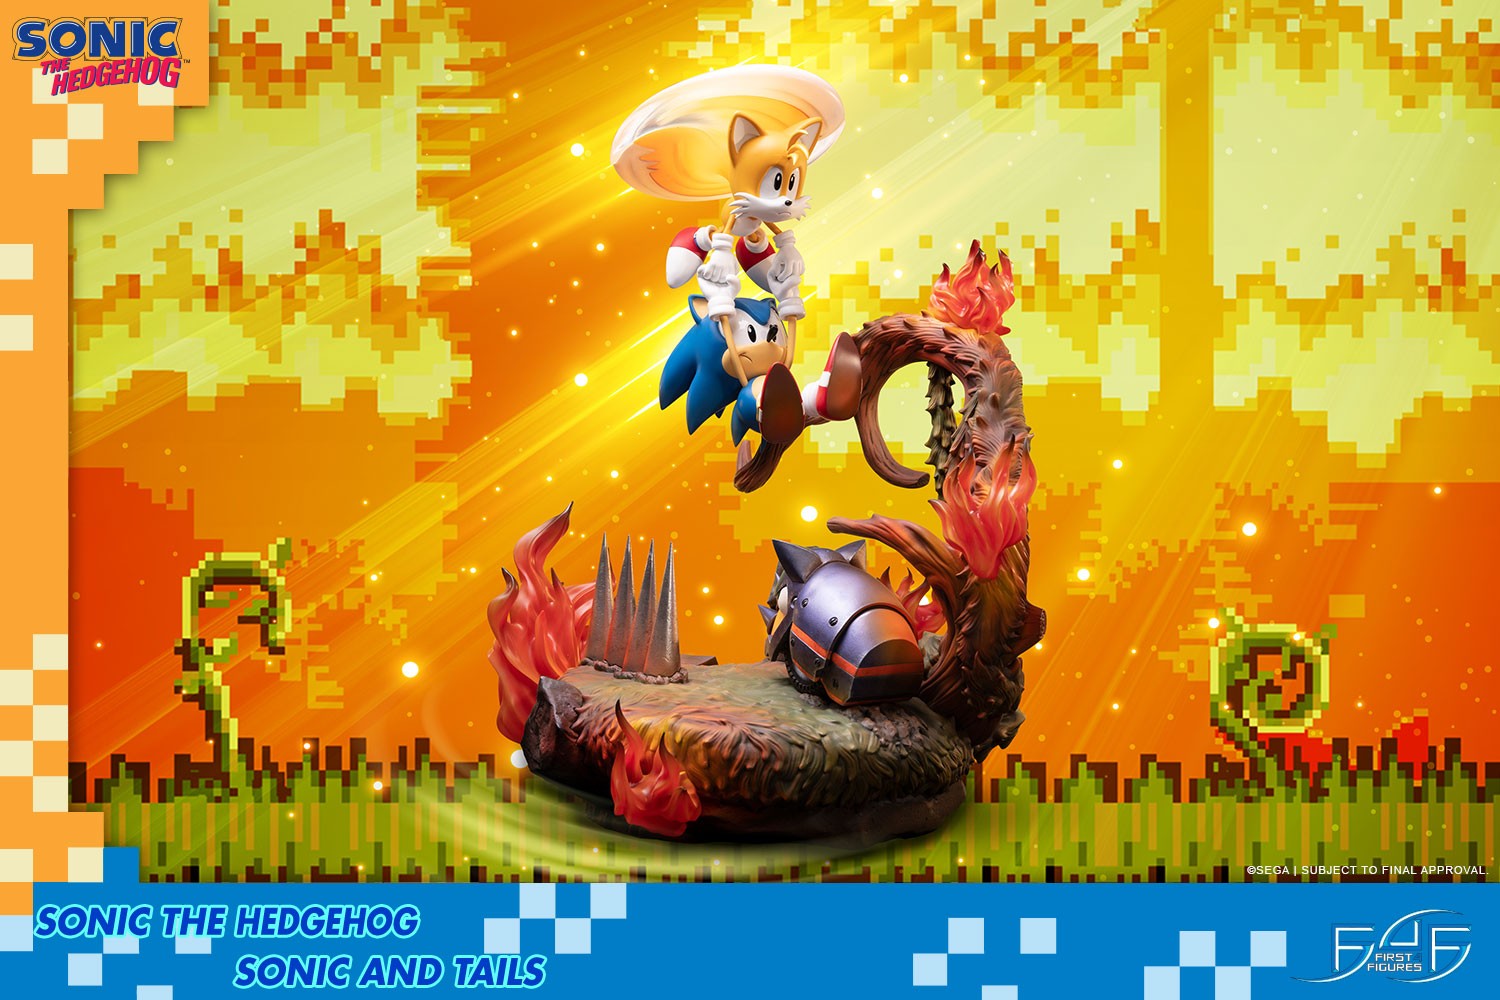 Sonic the Hedgehog – Sonic and Tails Standard Edition